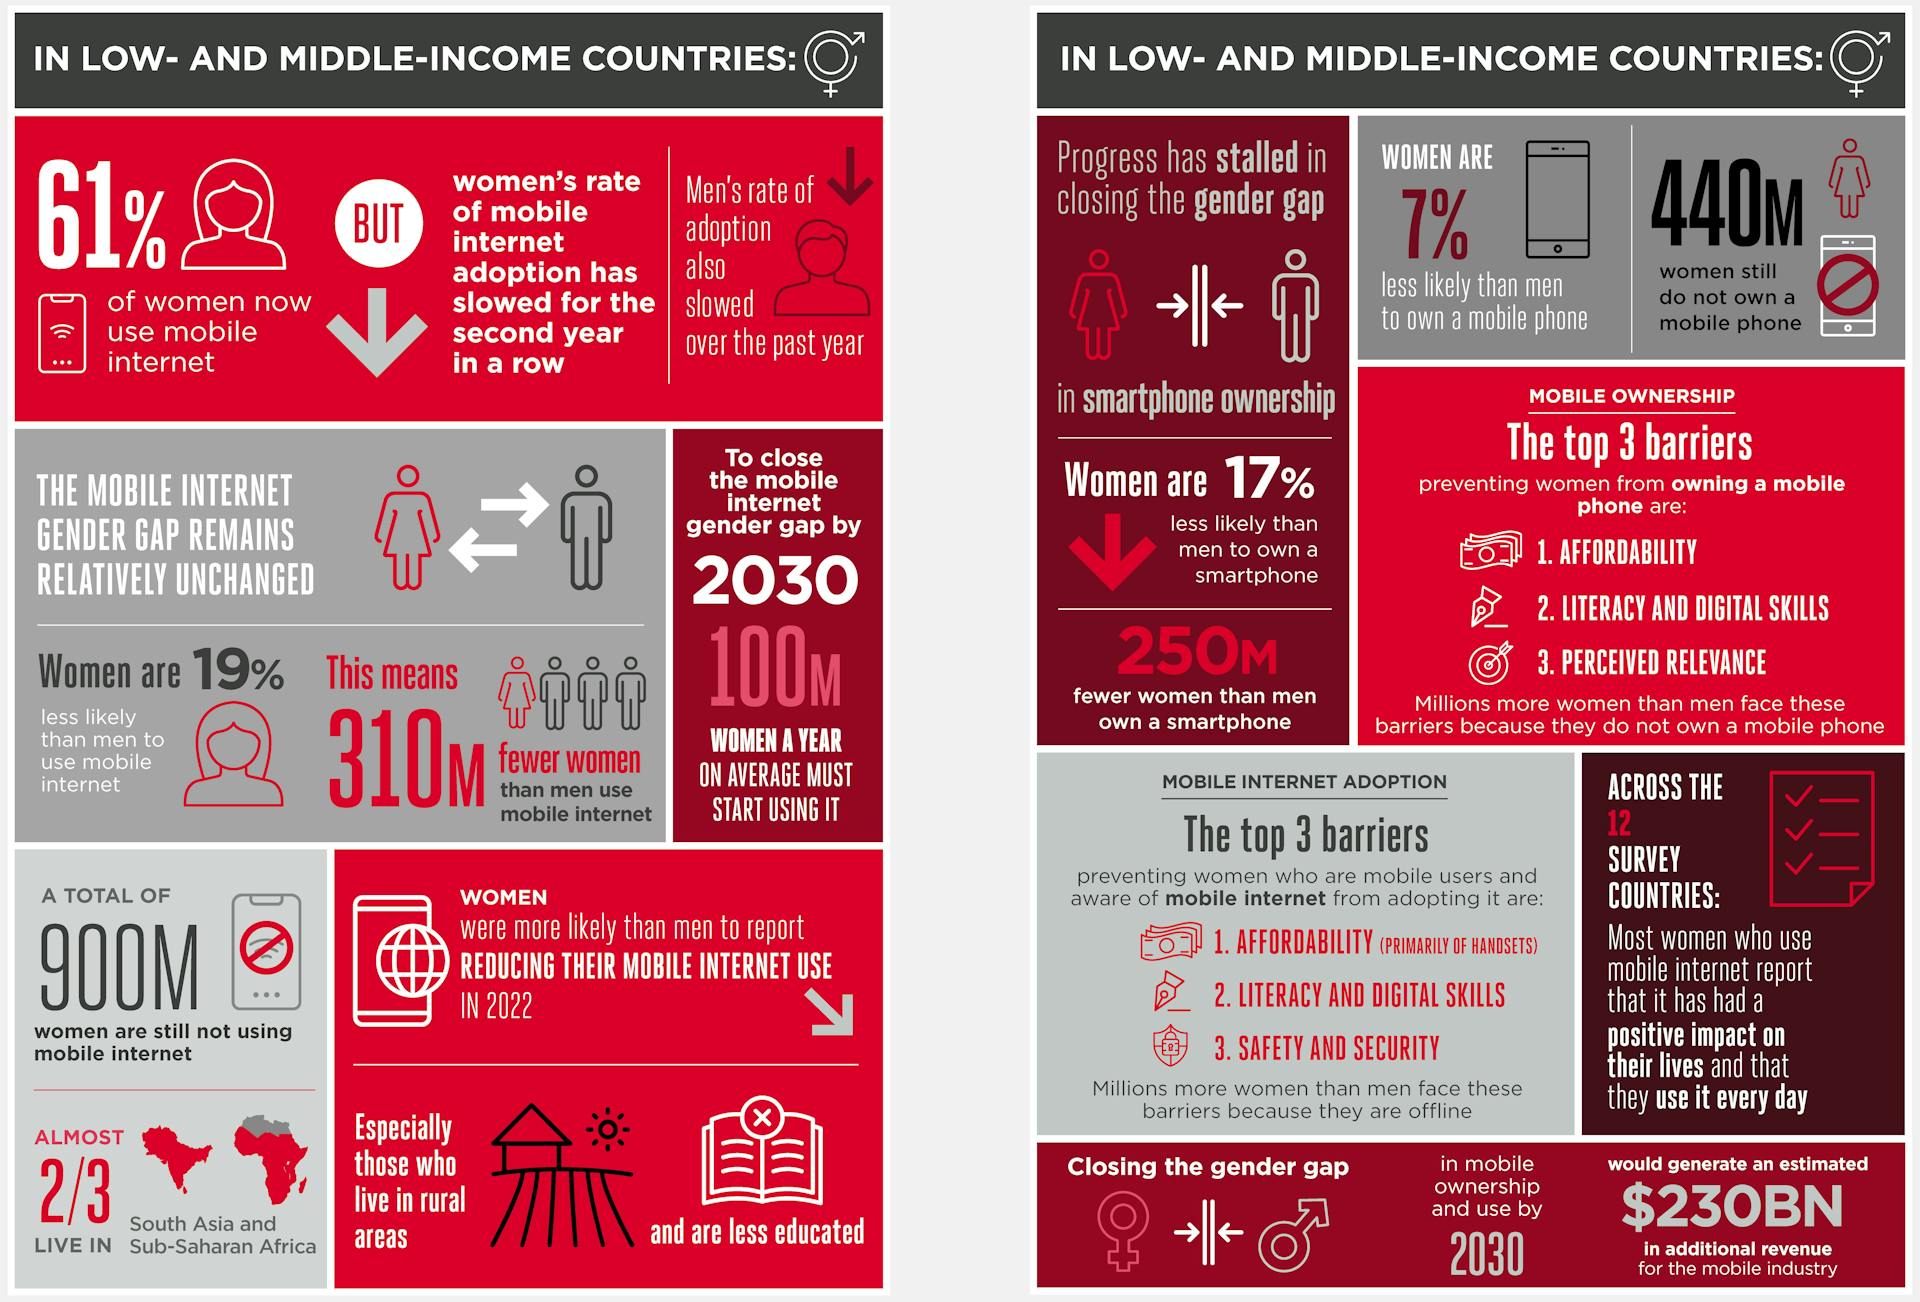 An infographic about digital access gender gap in low- and mid-income countries, including the statistic that women are 7% less likely to own a mobile phone. 